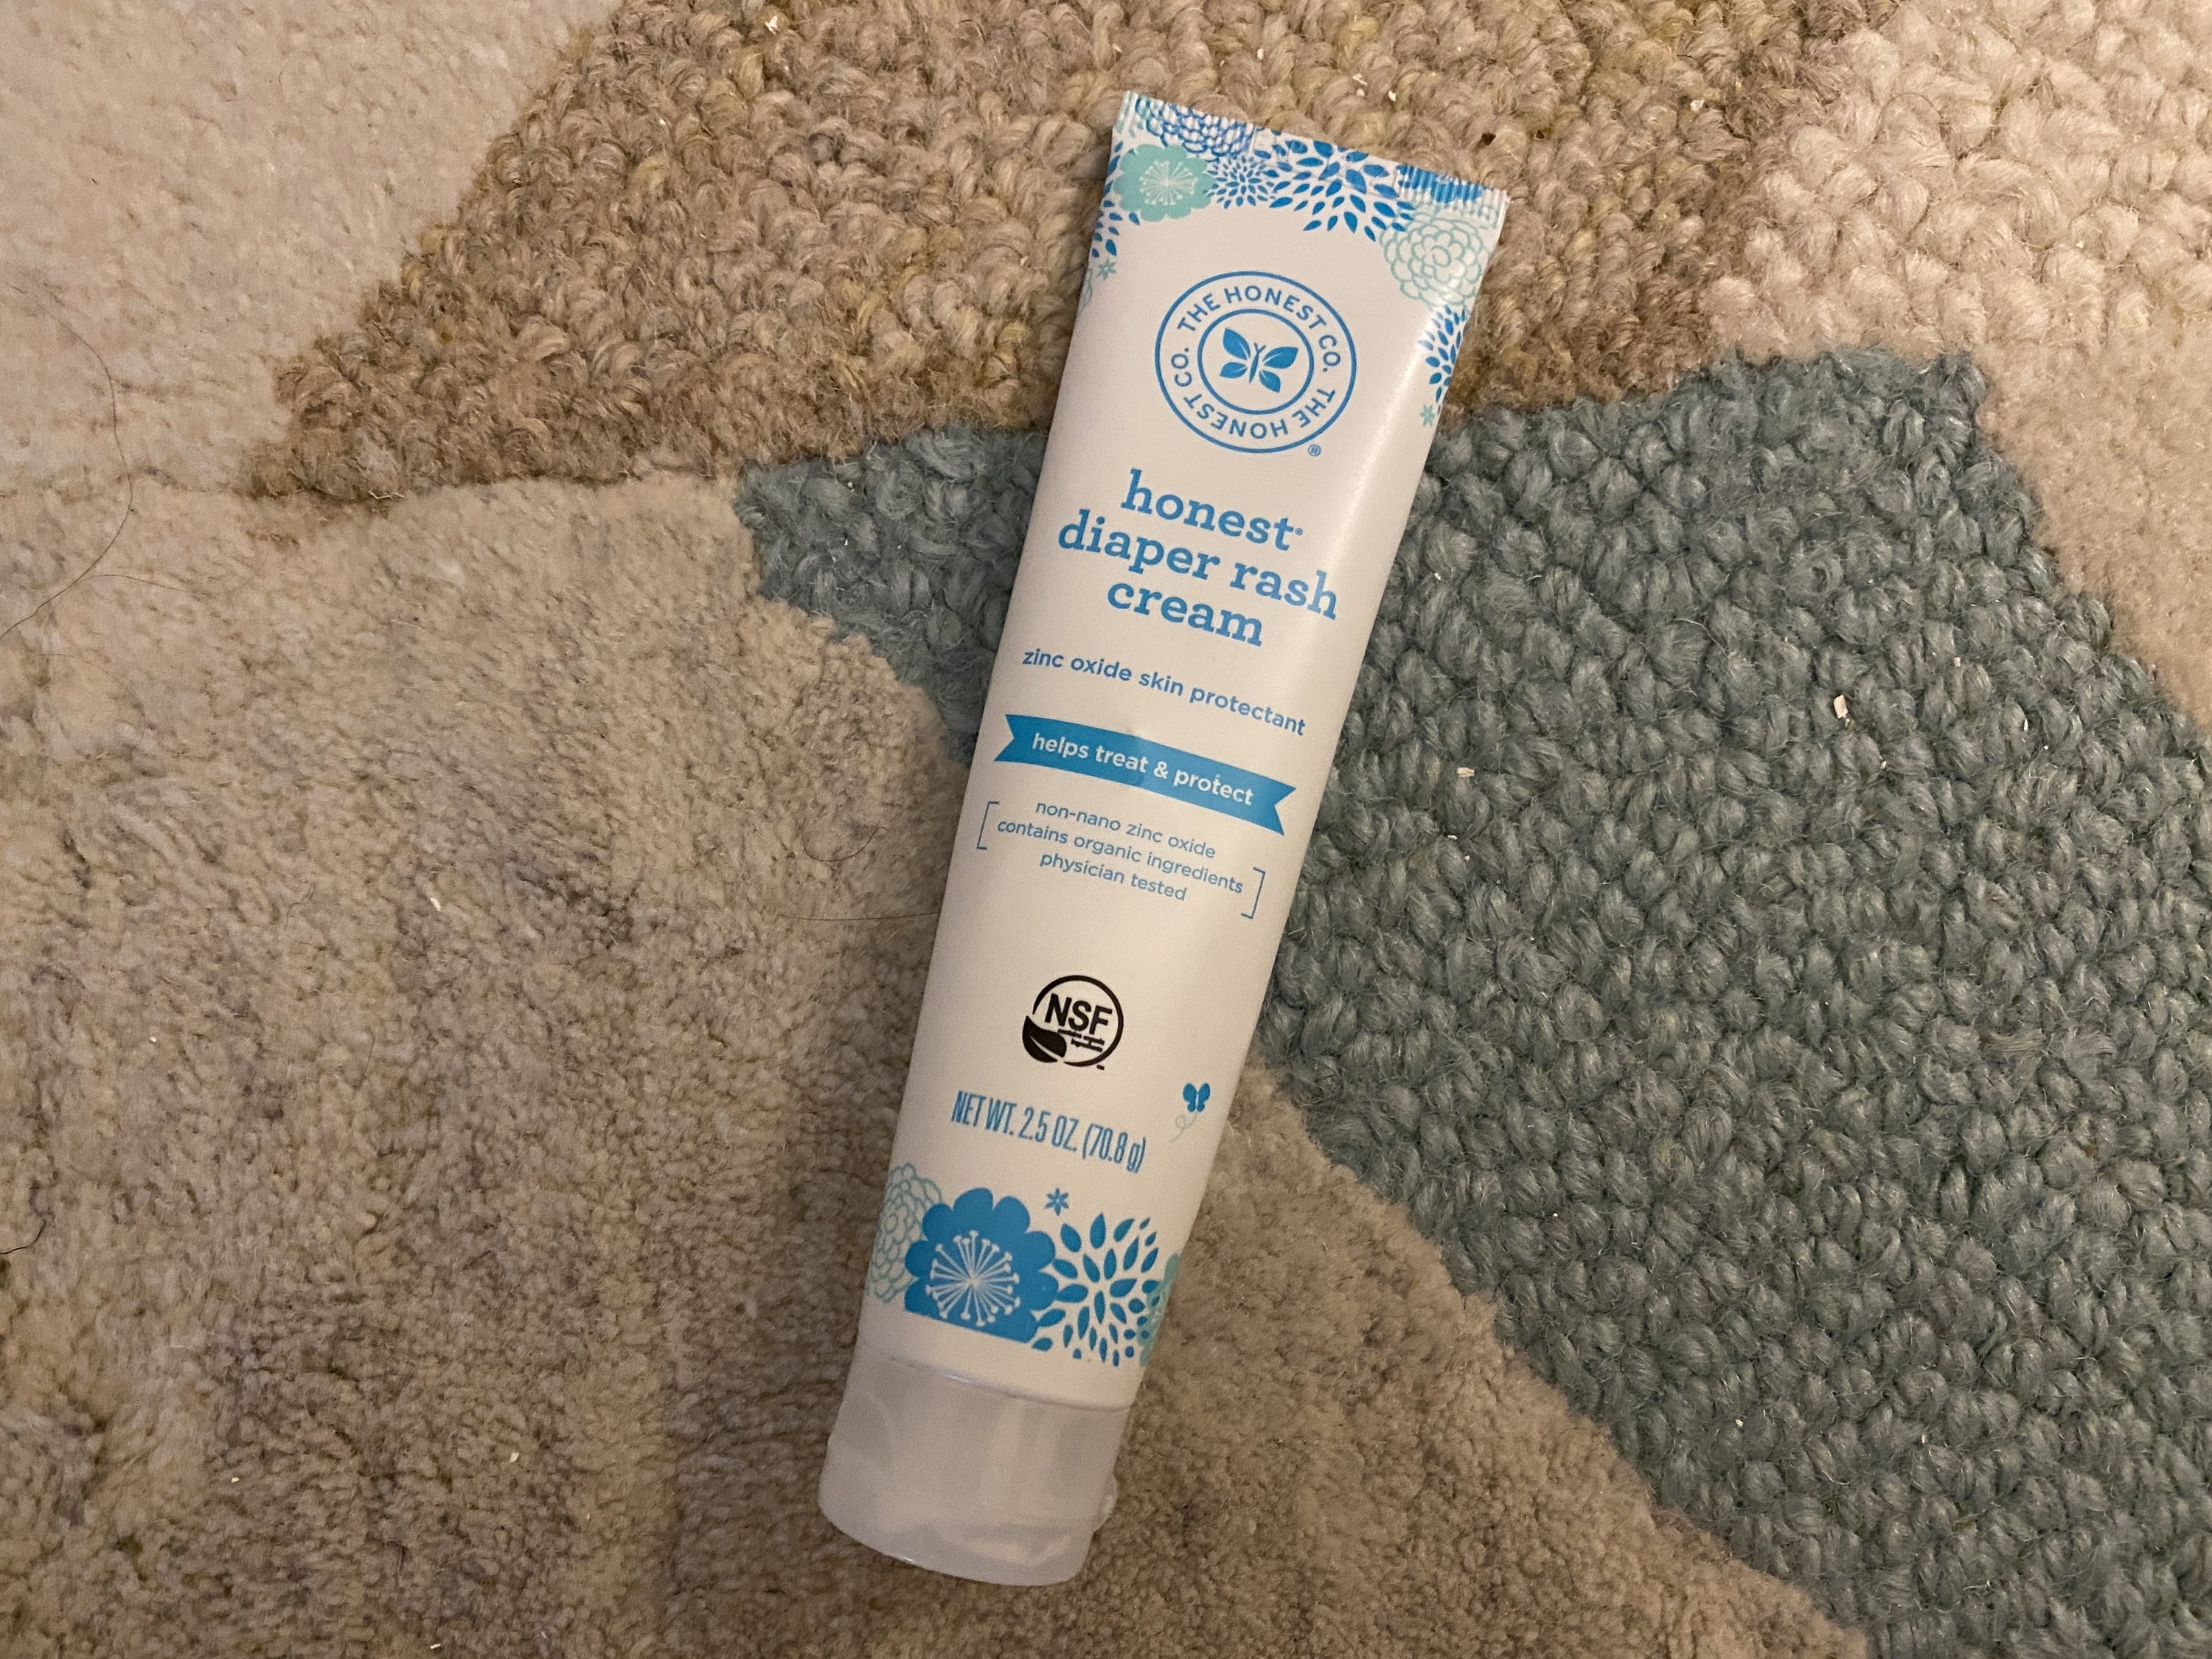 A white tube of diaper rash cream with blue lettering and logo